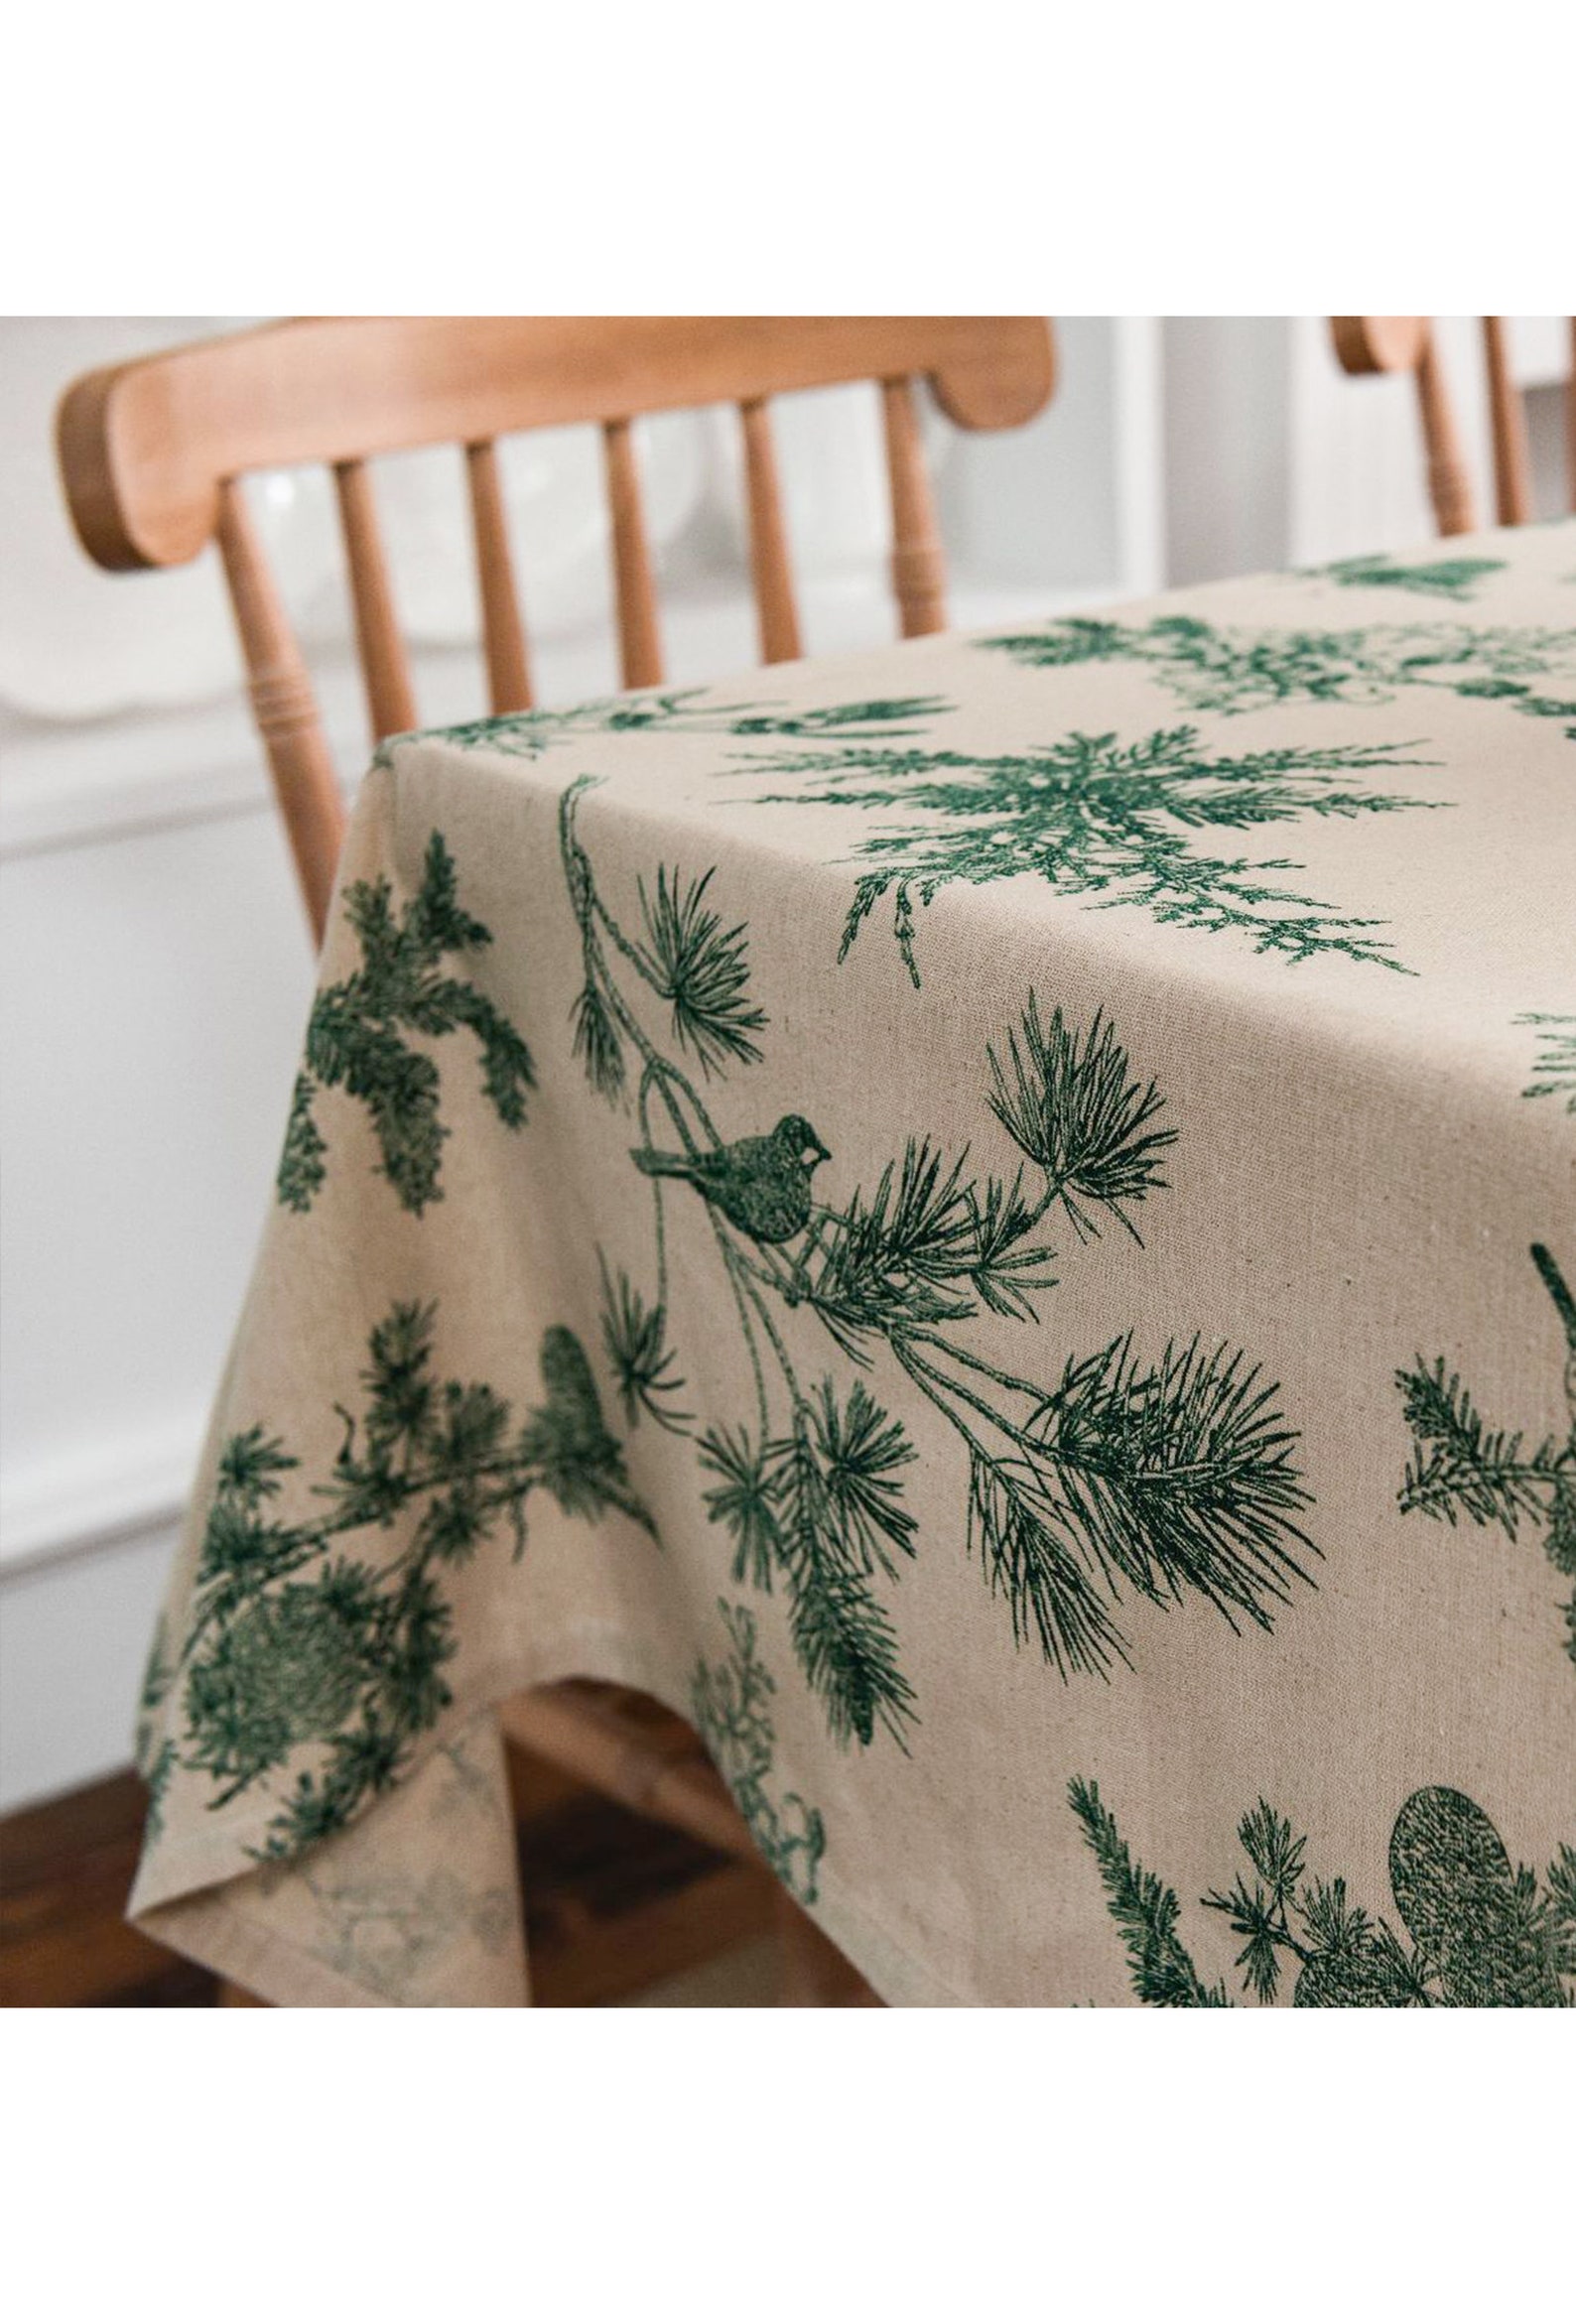 Pinecone Tablecloth Hand Painted Pine Tree Pattern - Etsy